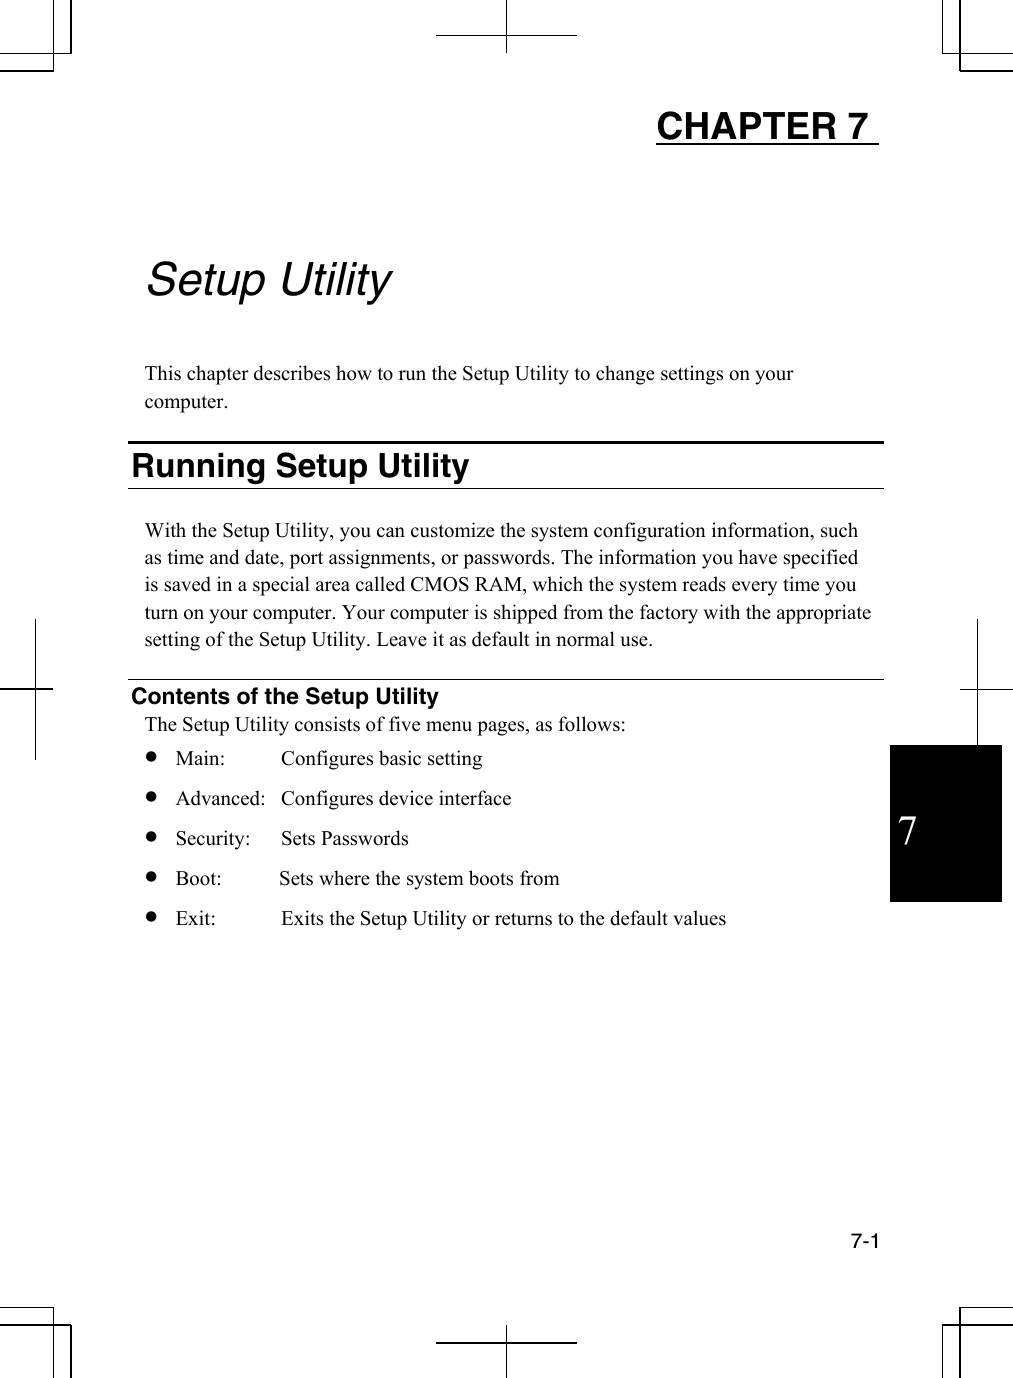  7-1  7 CHAPTER 7         Setup Utility  This chapter describes how to run the Setup Utility to change settings on your computer.  Running Setup Utility  With the Setup Utility, you can customize the system configuration information, such as time and date, port assignments, or passwords. The information you have specified is saved in a special area called CMOS RAM, which the system reads every time you turn on your computer. Your computer is shipped from the factory with the appropriate setting of the Setup Utility. Leave it as default in normal use.  Contents of the Setup Utility The Setup Utility consists of five menu pages, as follows: •  Main:  Configures basic setting   •  Advanced:  Configures device interface  •  Security:  Sets Passwords  •  Boot:           Sets where the system boots from •  Exit:  Exits the Setup Utility or returns to the default values  